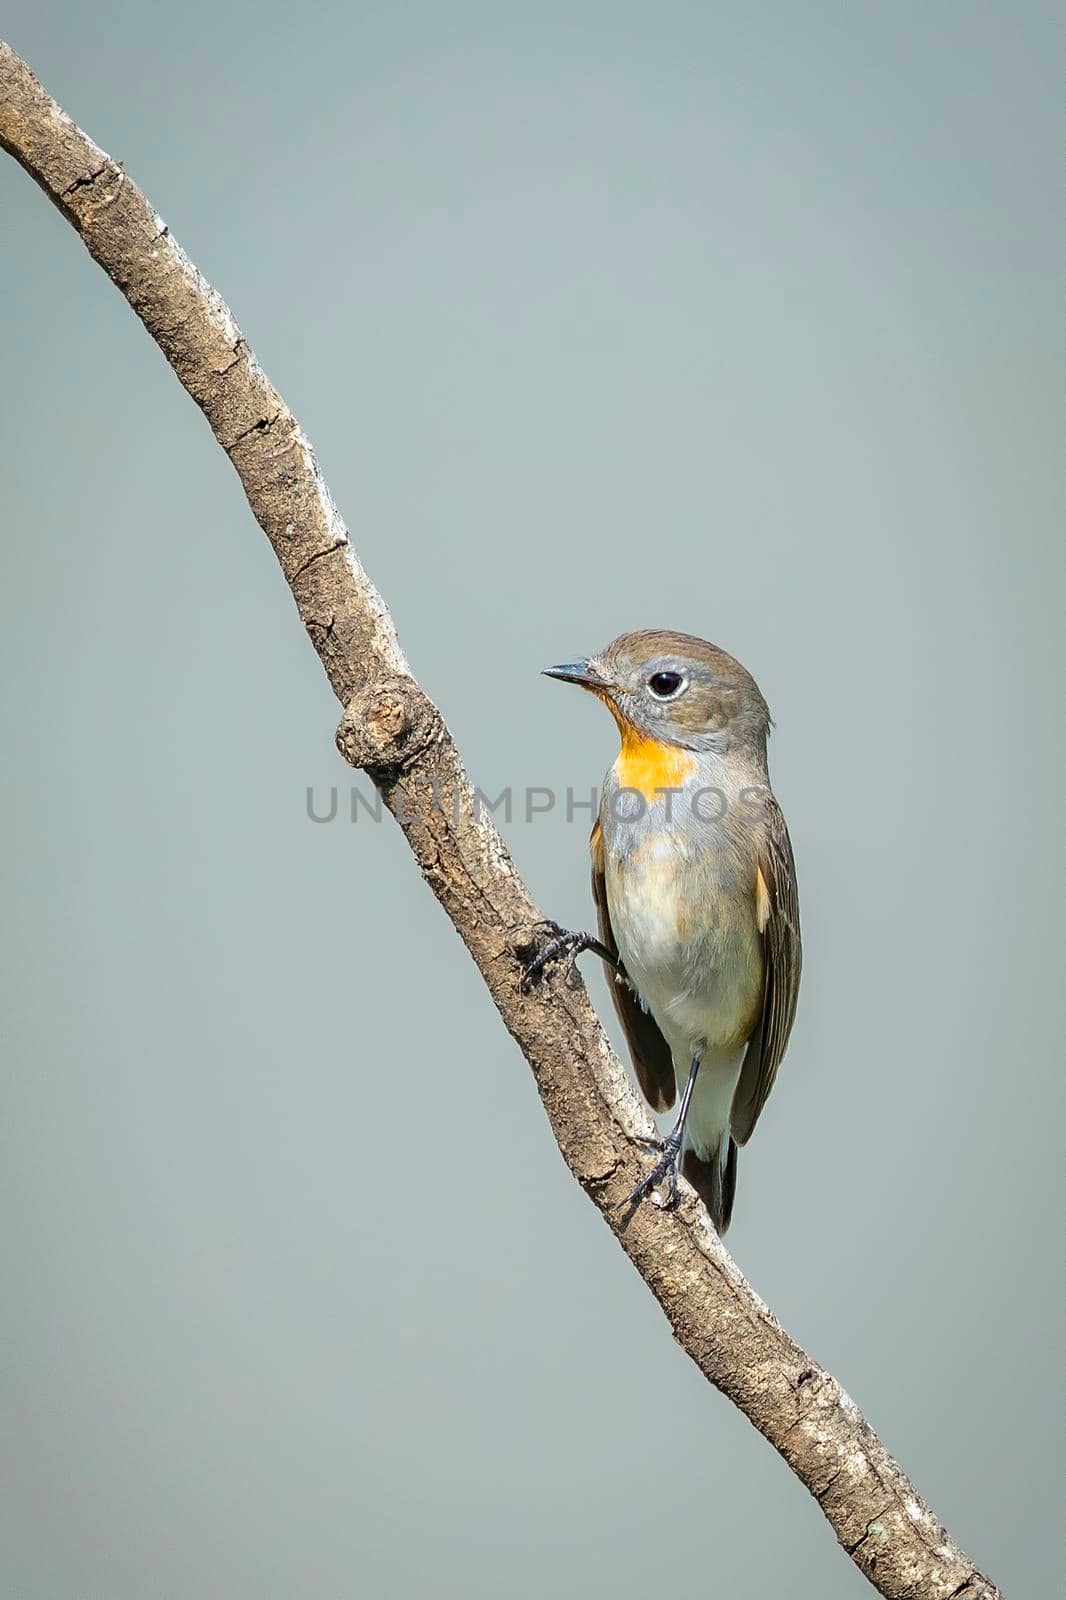 Image of Taiga Flycatcher or Red-throated Flycatcher Bird (Ficedula albicilla) on a tree branch on nature background. Birds. Animal.